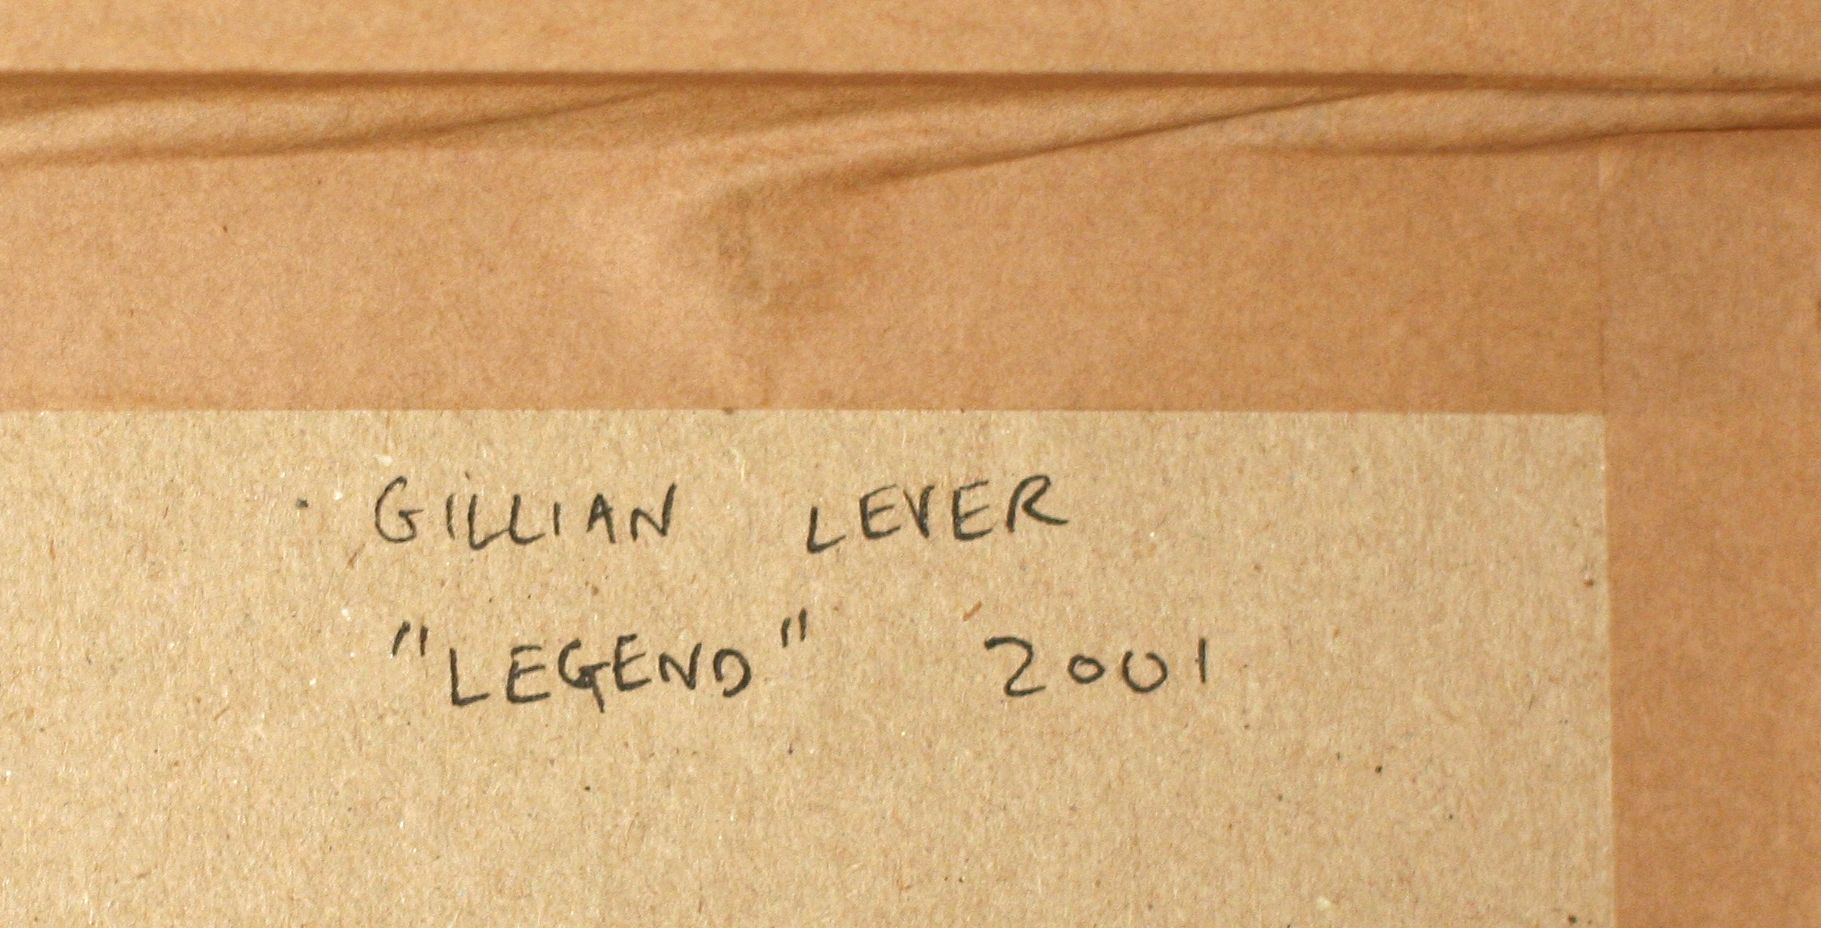 Gillian Lever (b. 1963)  Legend  Oil on board Signed, titled and dated 2001 verso 18cm x 18.5cm ( - Image 2 of 2